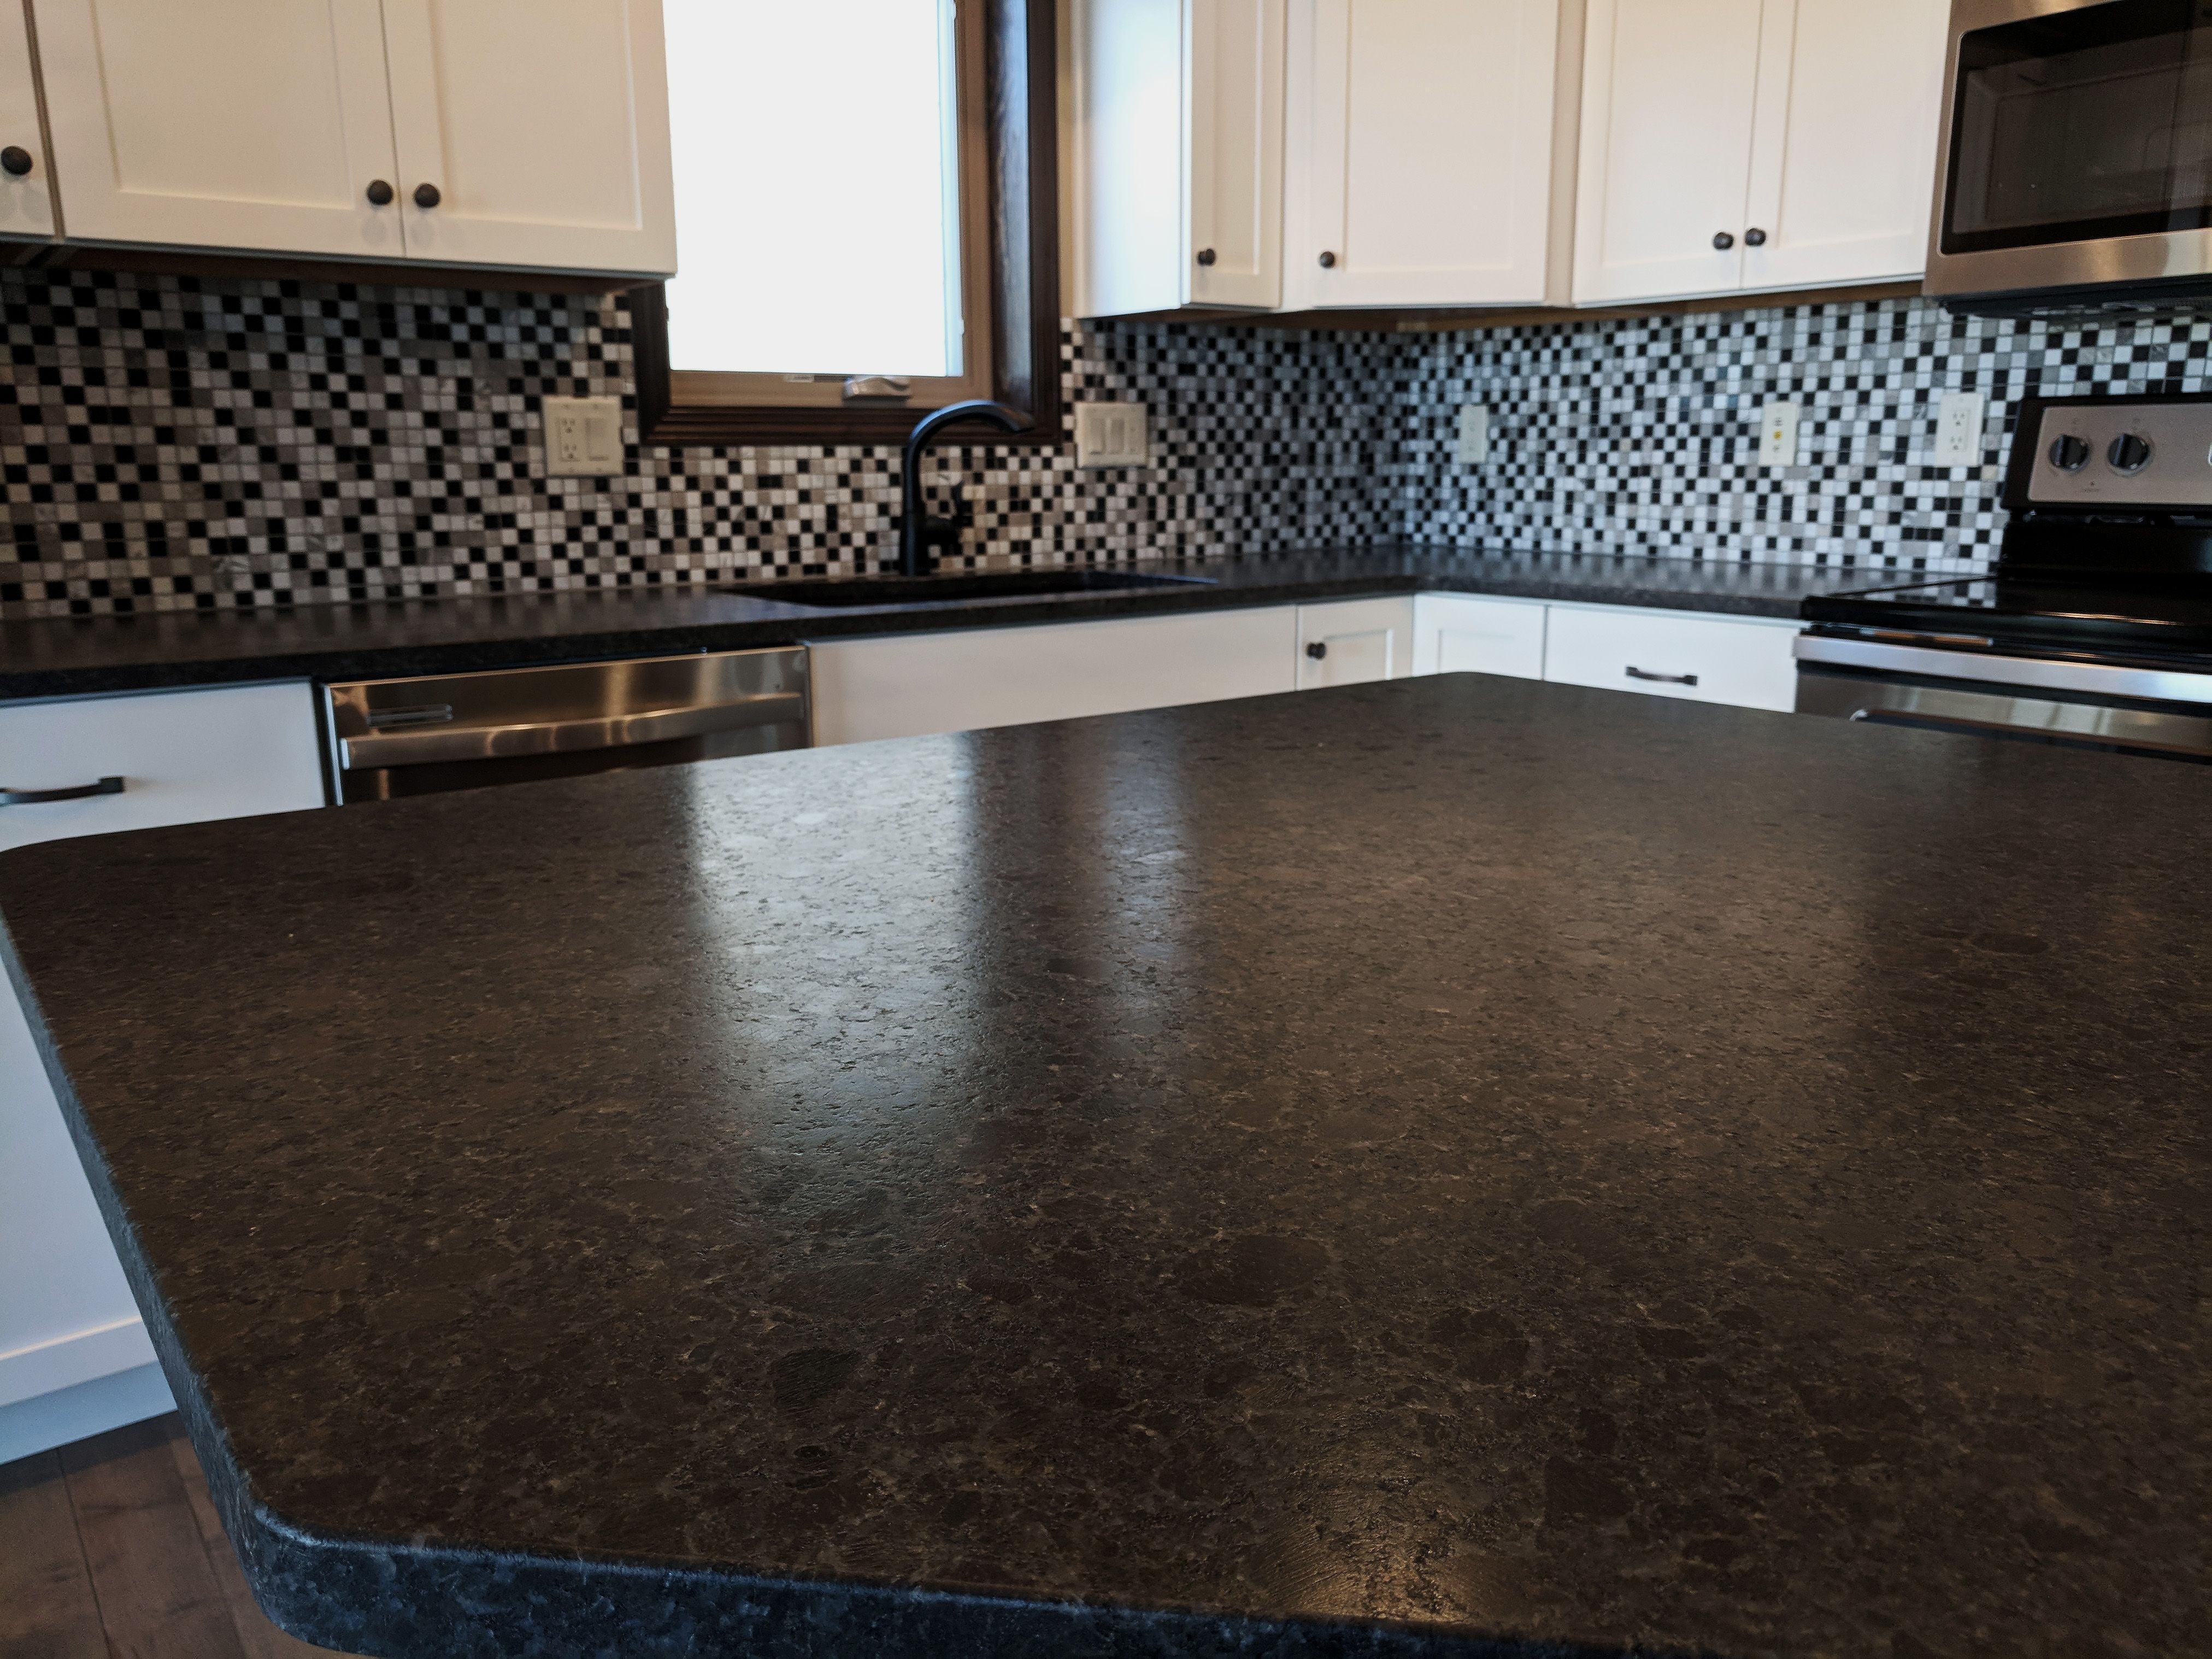 How To Take Care Of Leathered Granite Countertops